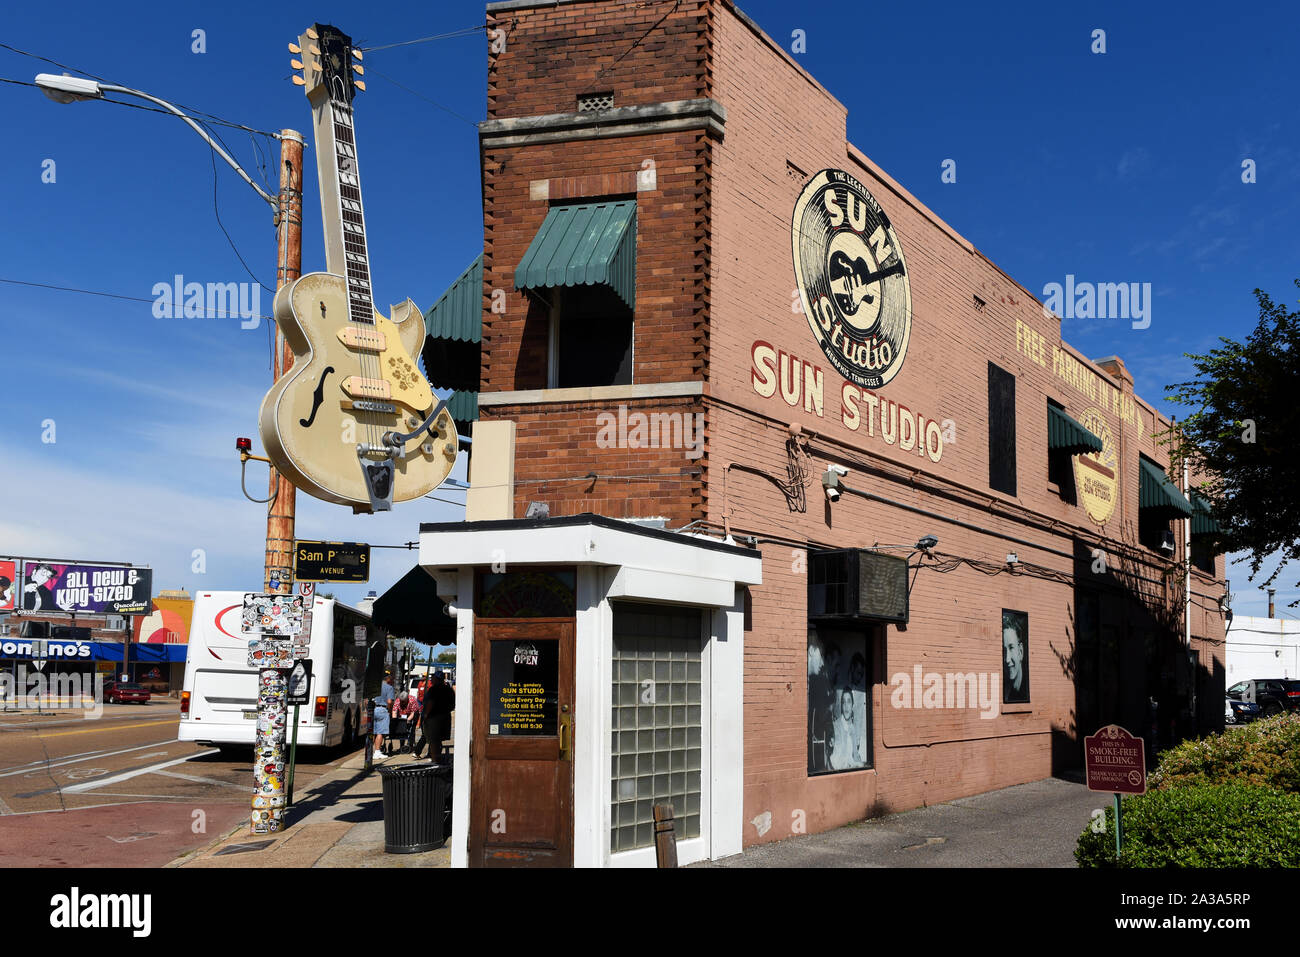 Memphis, TN, USA - September 24, 2019:  The legendary Sun Studio on Union Avenue has been called the birthplace of Rock and Roll. Owner Sam Phillips r Stock Photo